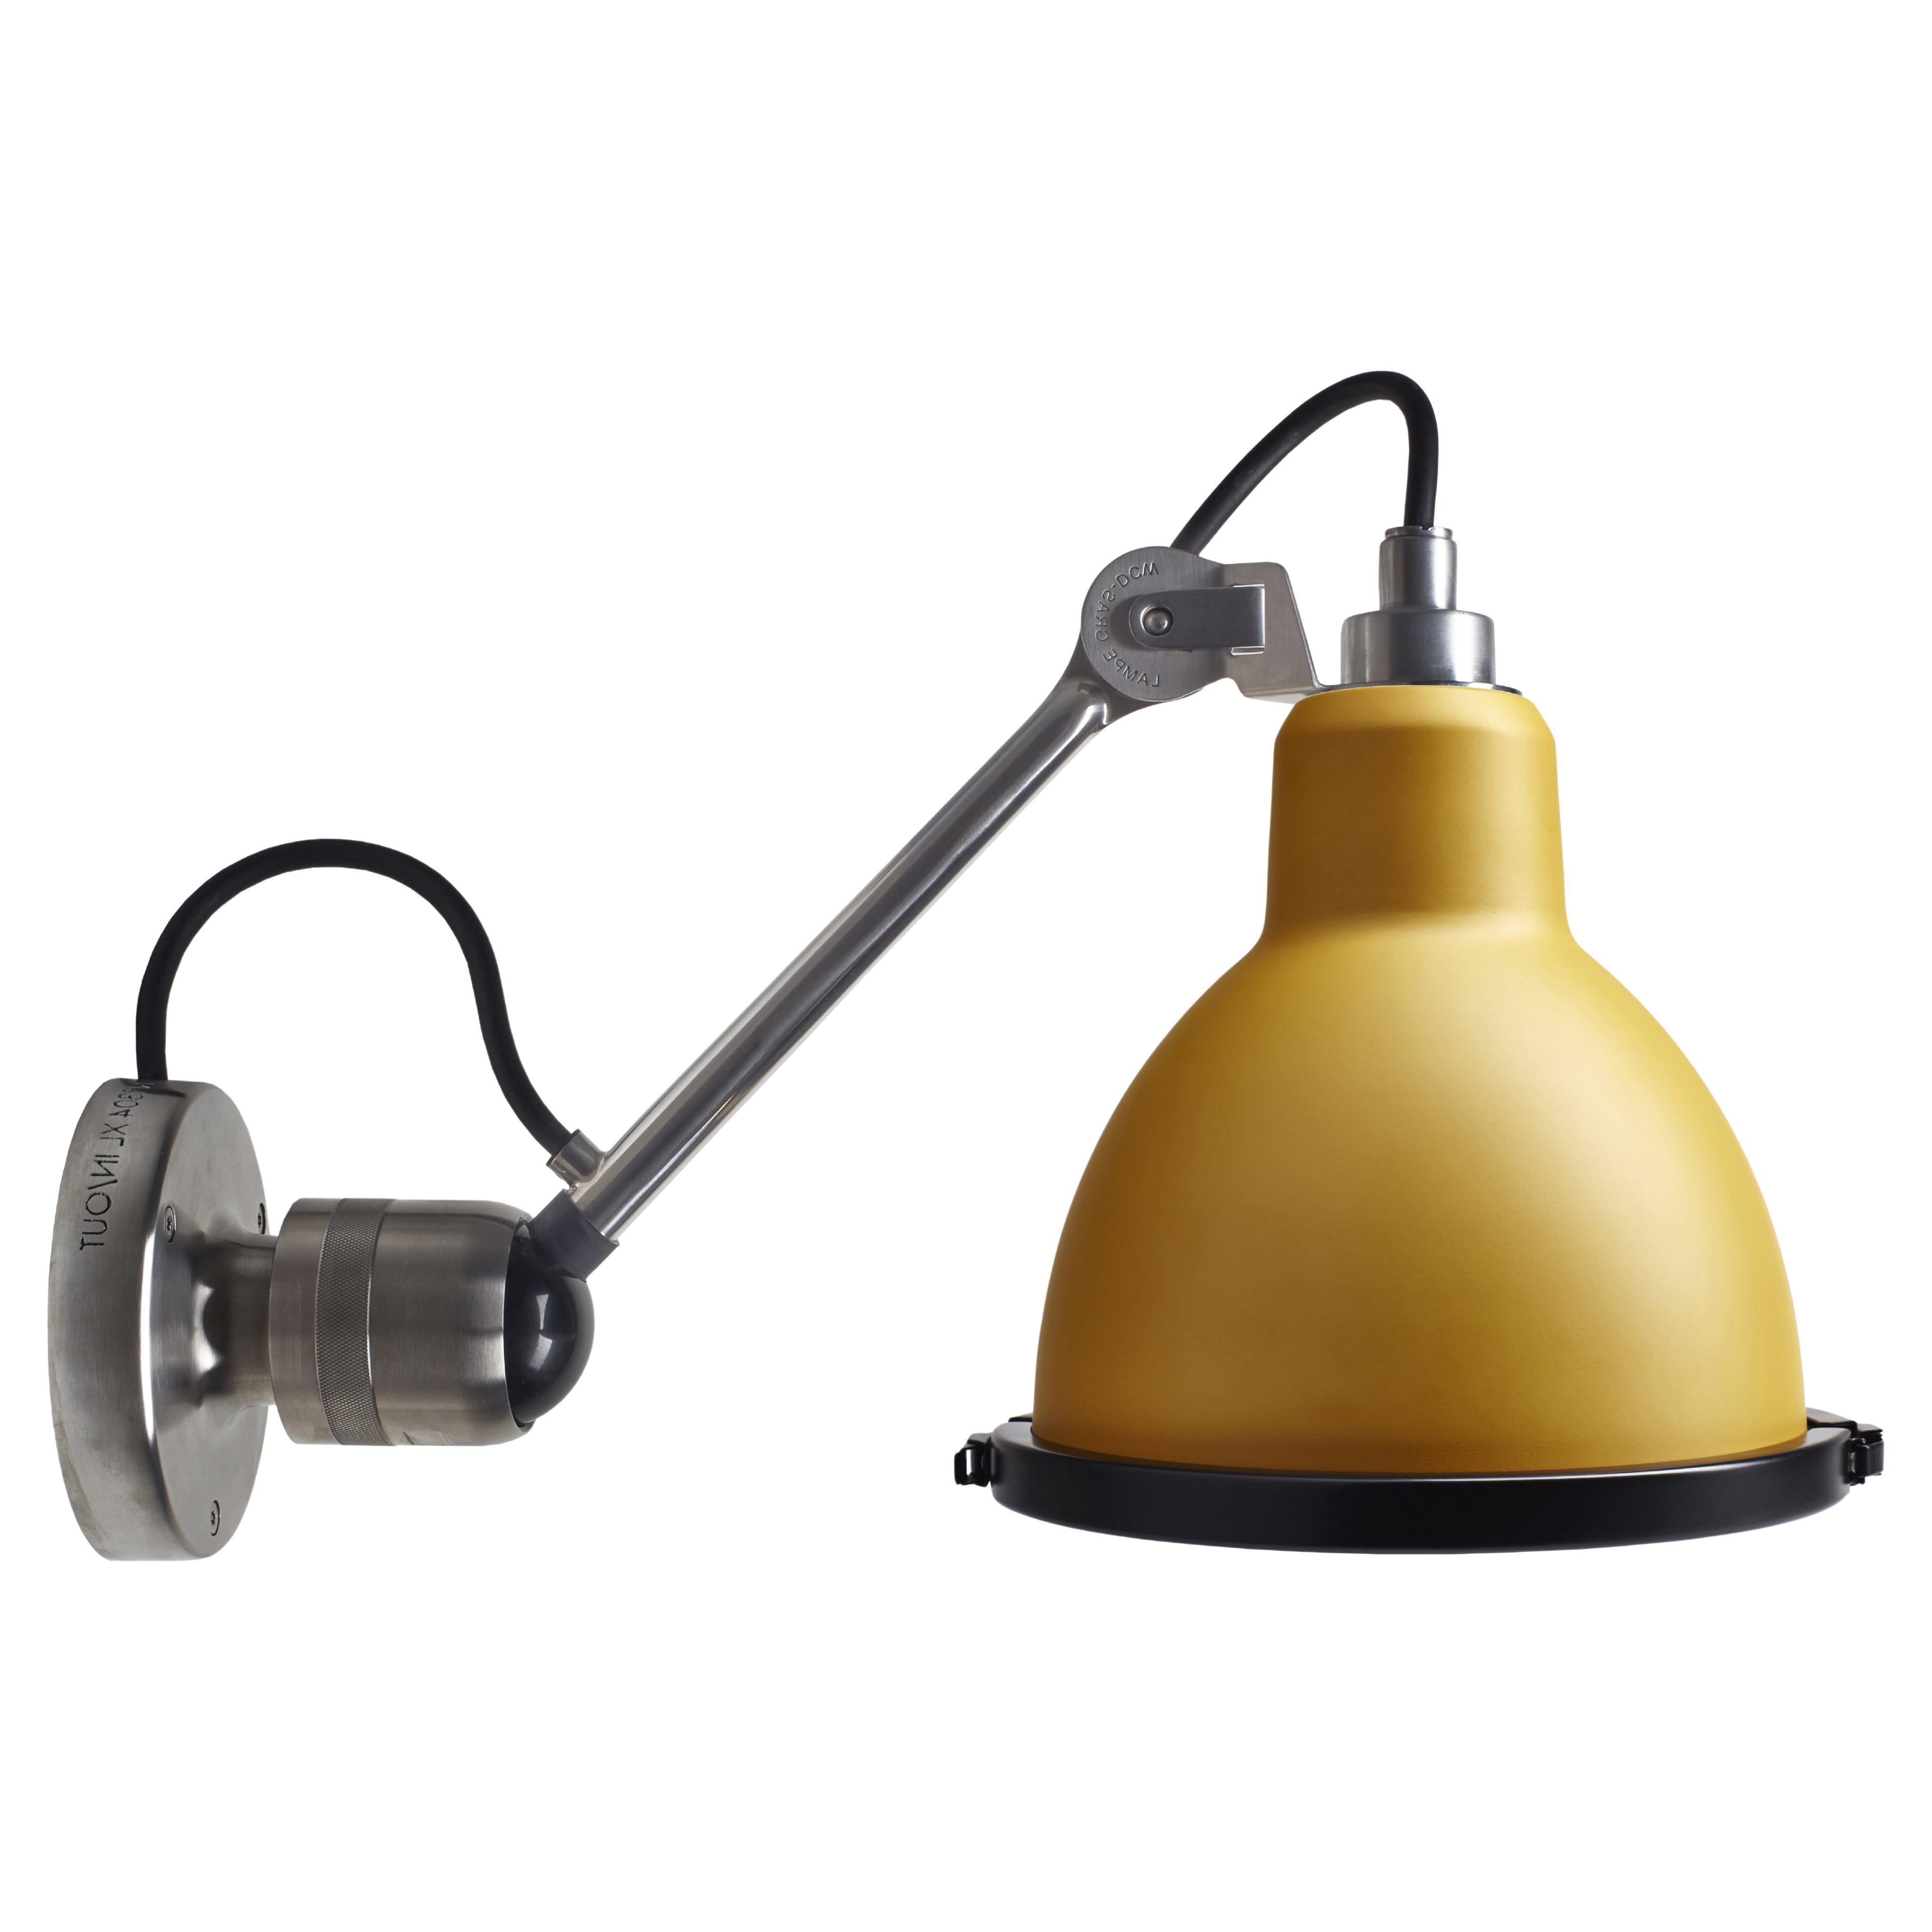 DCW Editions La Lampe Gras N°304 XL Round Wall Lamp in Bare Arm & Yellow Shade For Sale